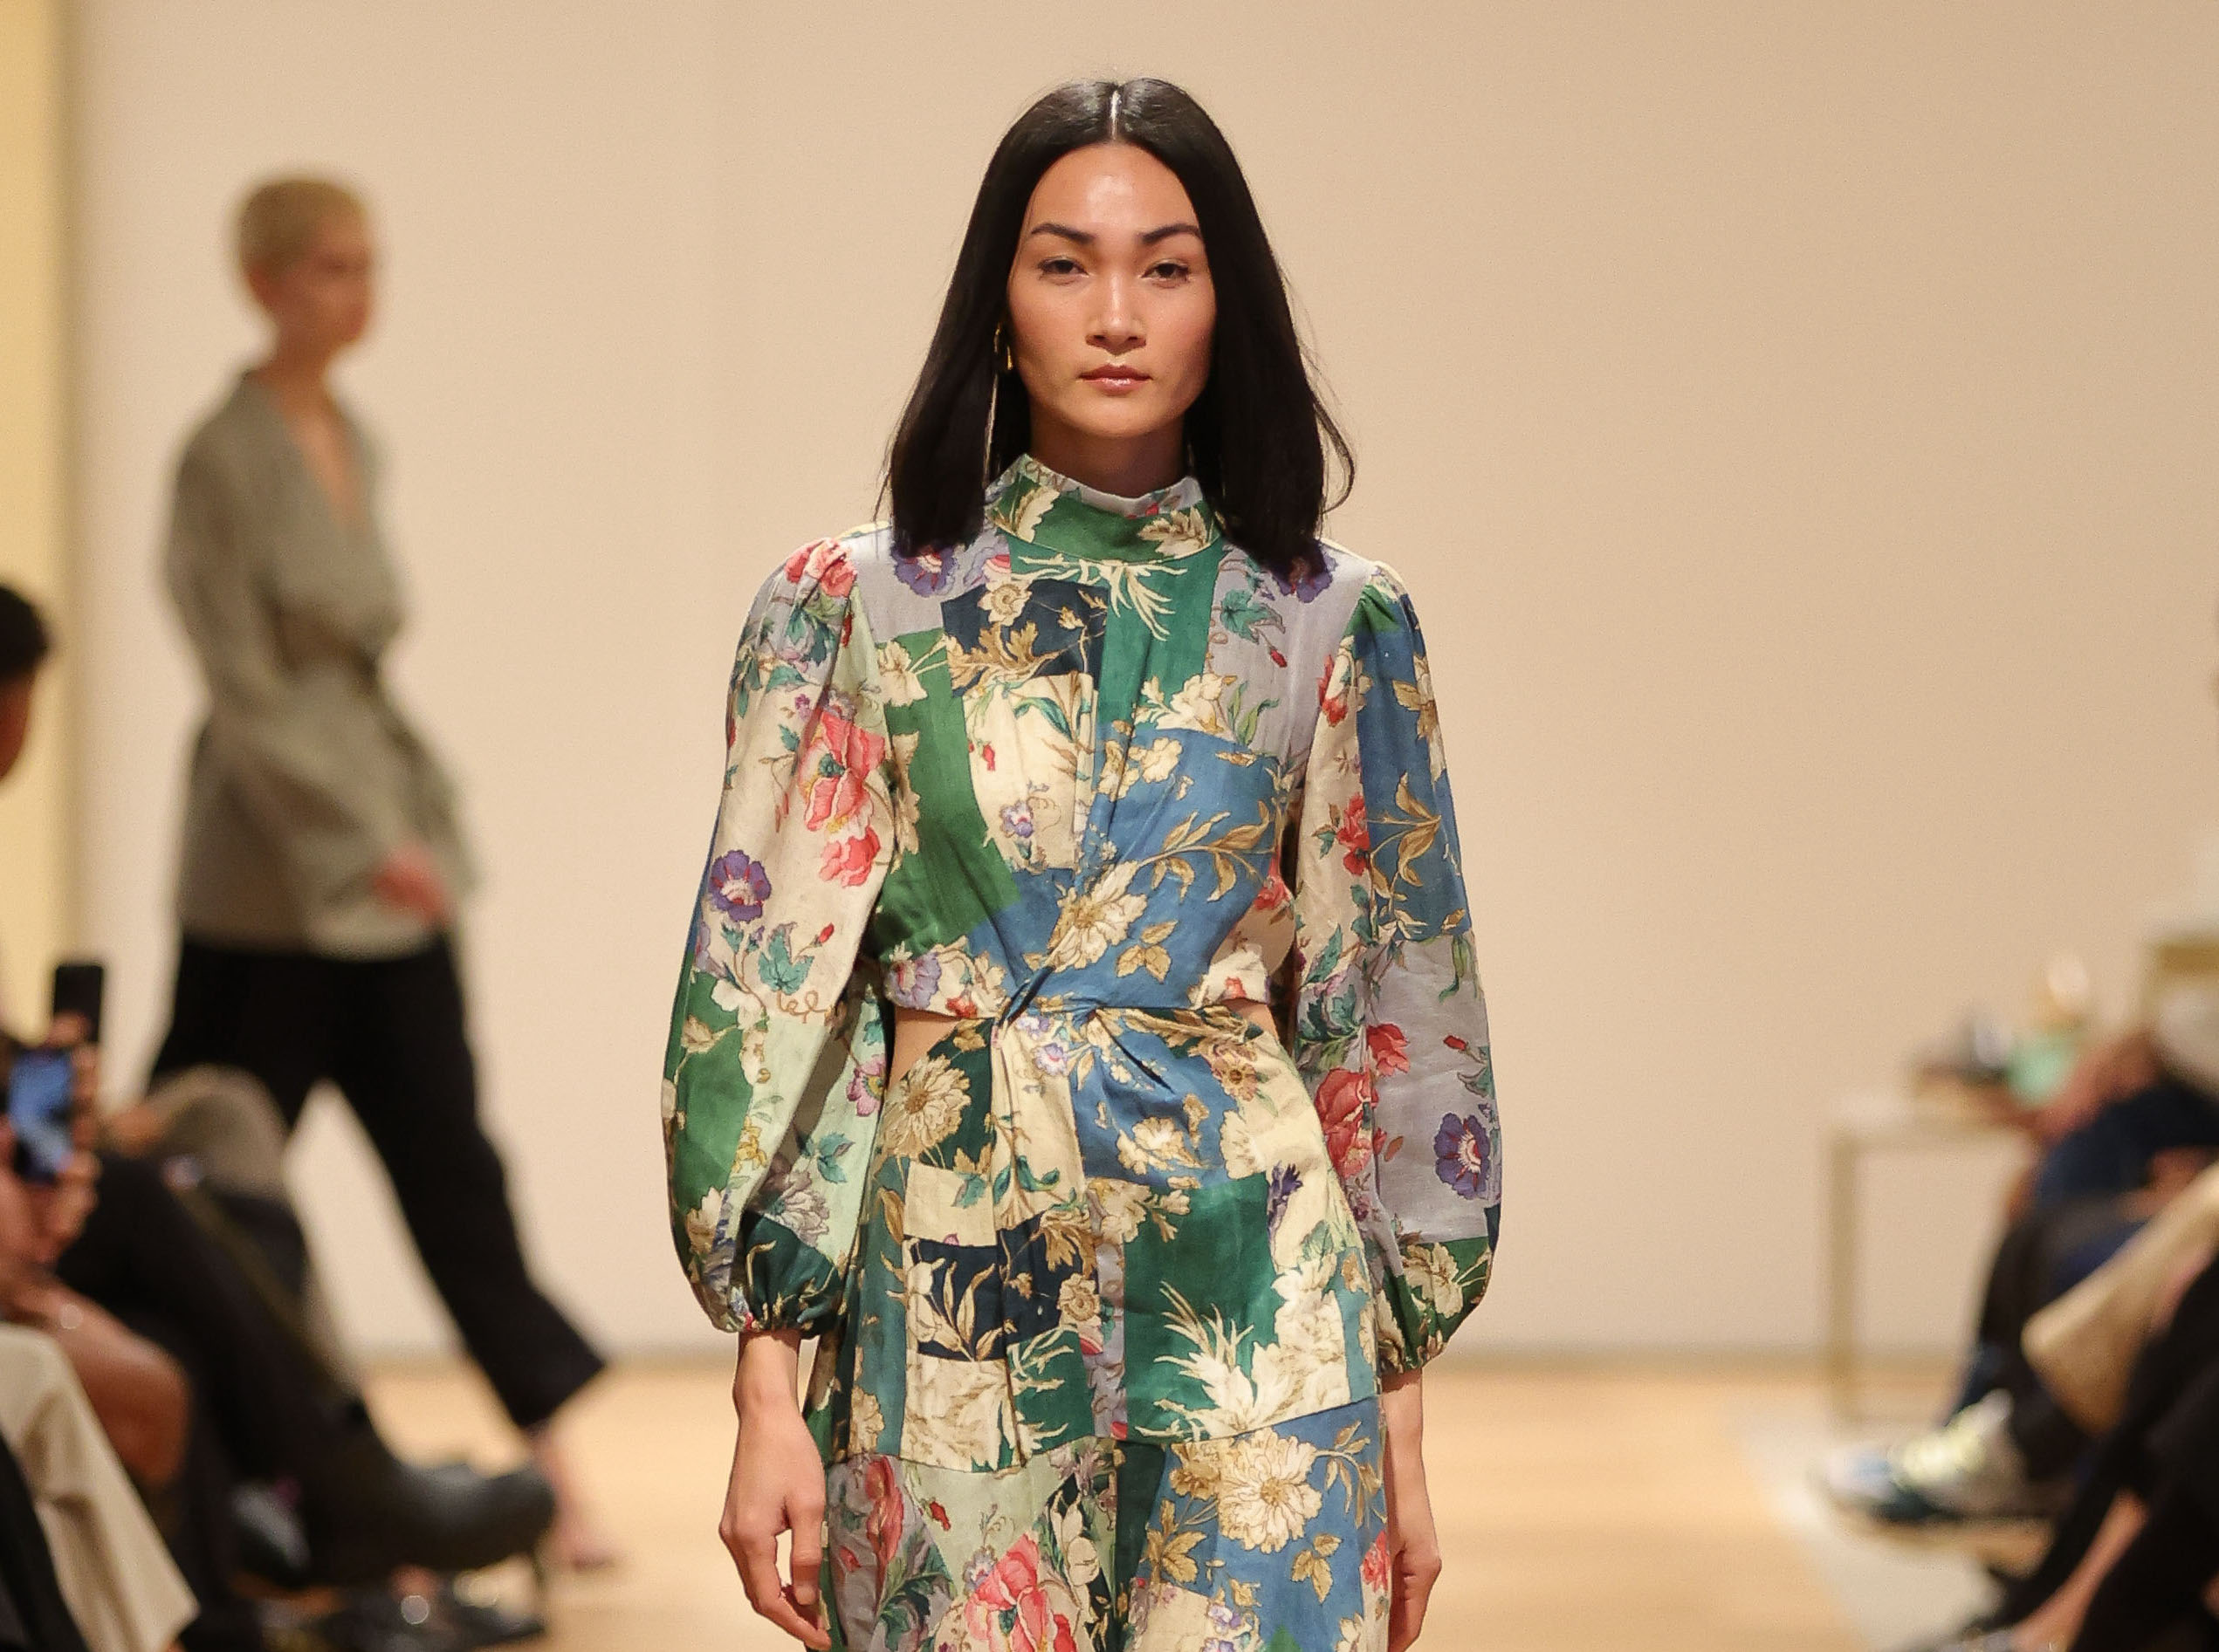 ALEMAIS Announced As Winner Of The Paypal Melbourne Fashion Festival’s 26™ National Designer Award Presented by David Jones